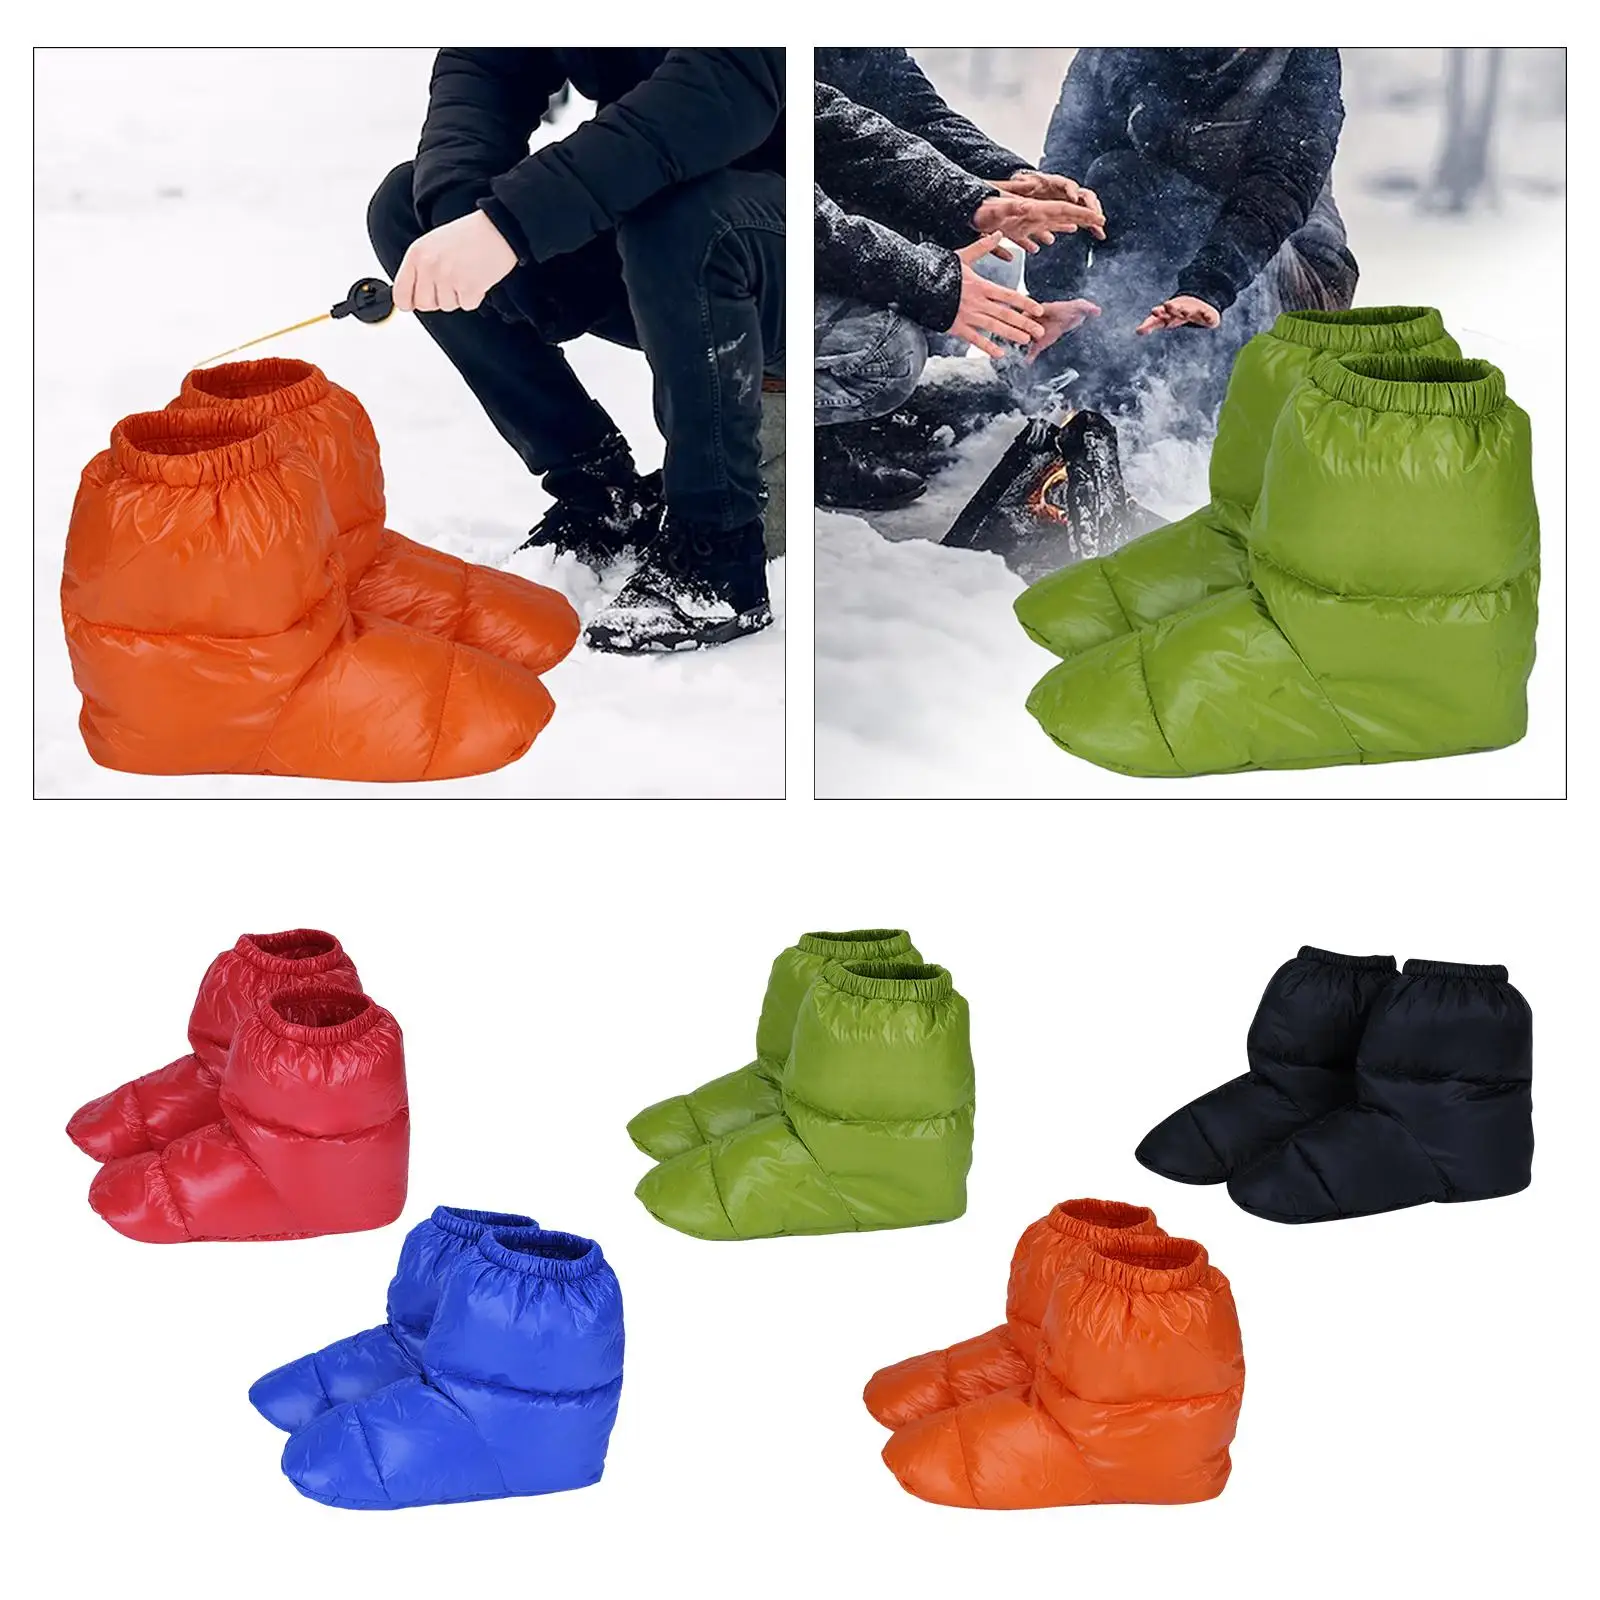 Winter Down Slippers Warm Bootie Shoes Keep Warm Lightweight Windproof Feet Cover Socks for Skiing Office Hiking Indoor Camping